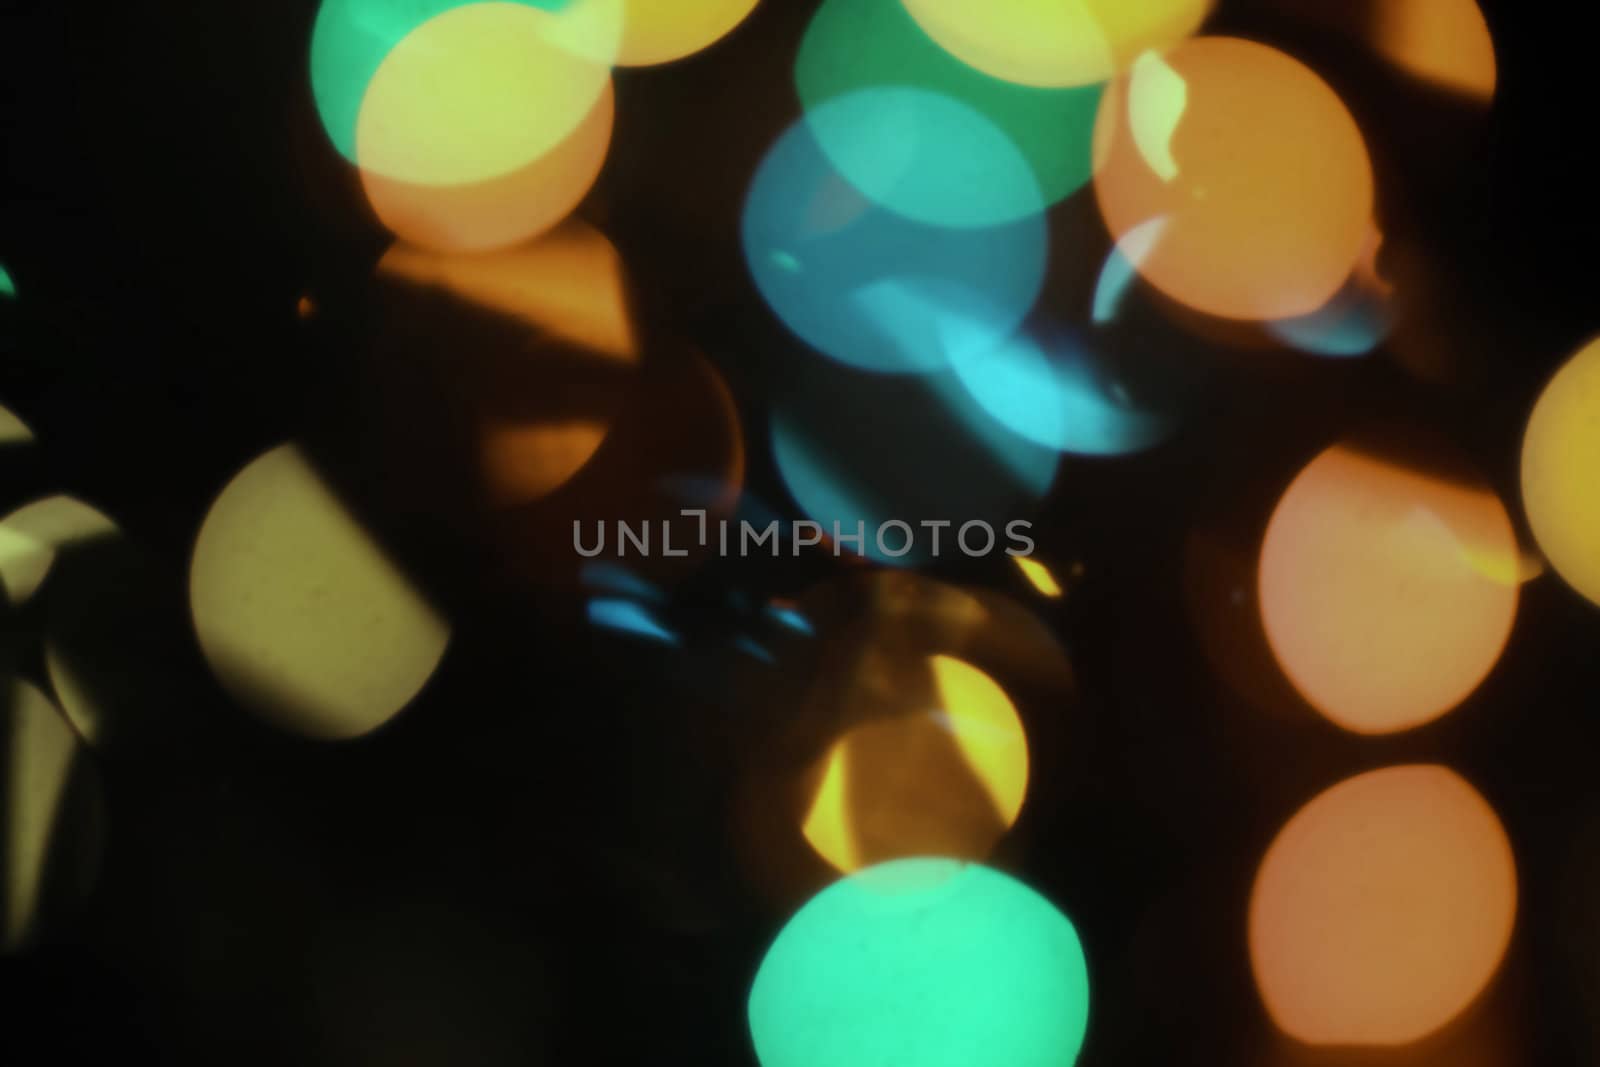  Bokeh - Lens Flares- Blurred Lights by jeremywhat